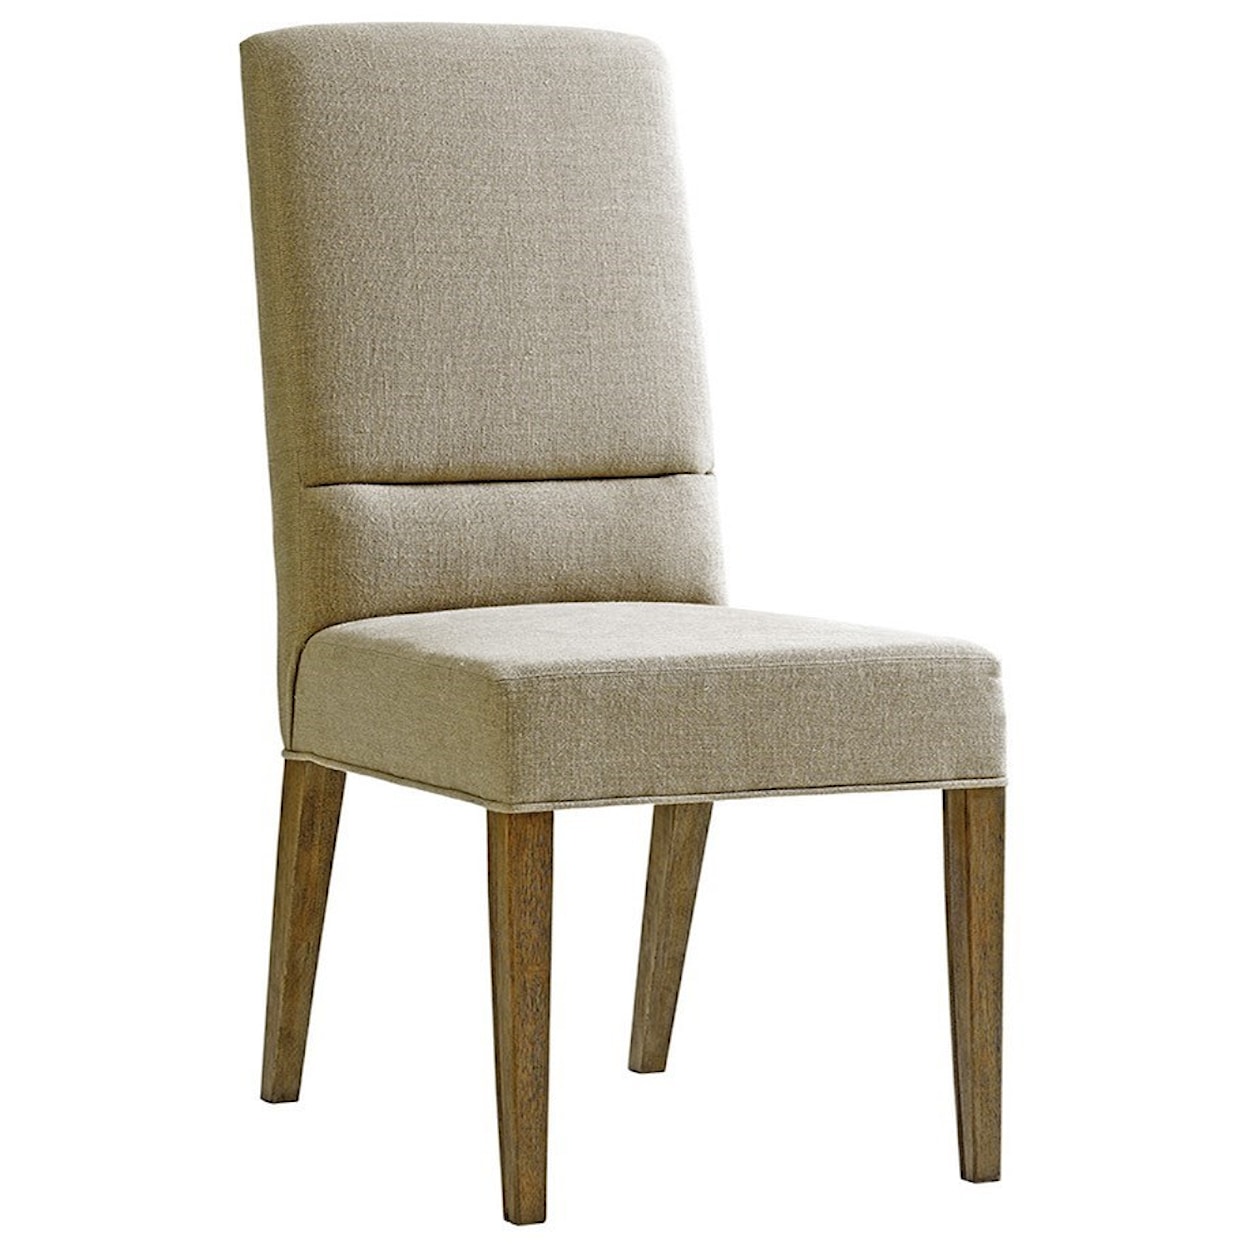 Lexington Shadow Play Metro Side Chair in Married Fabric